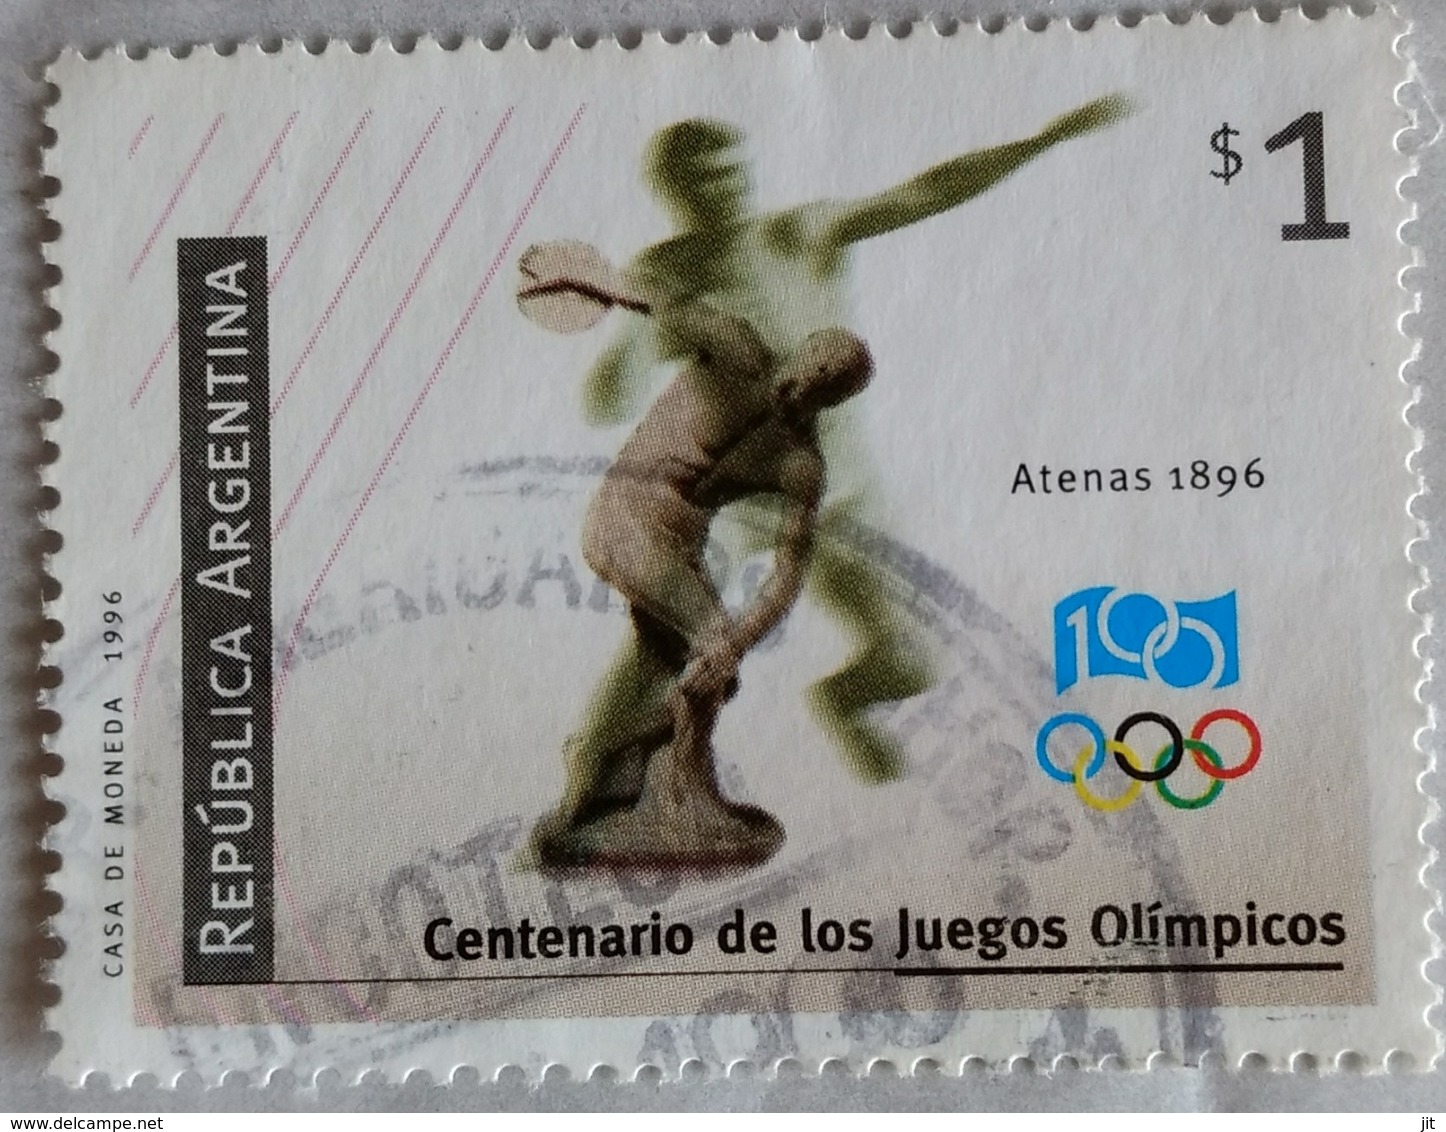 128. ARGENTINA 1996 USED STAMP OLYMPICS - Usados